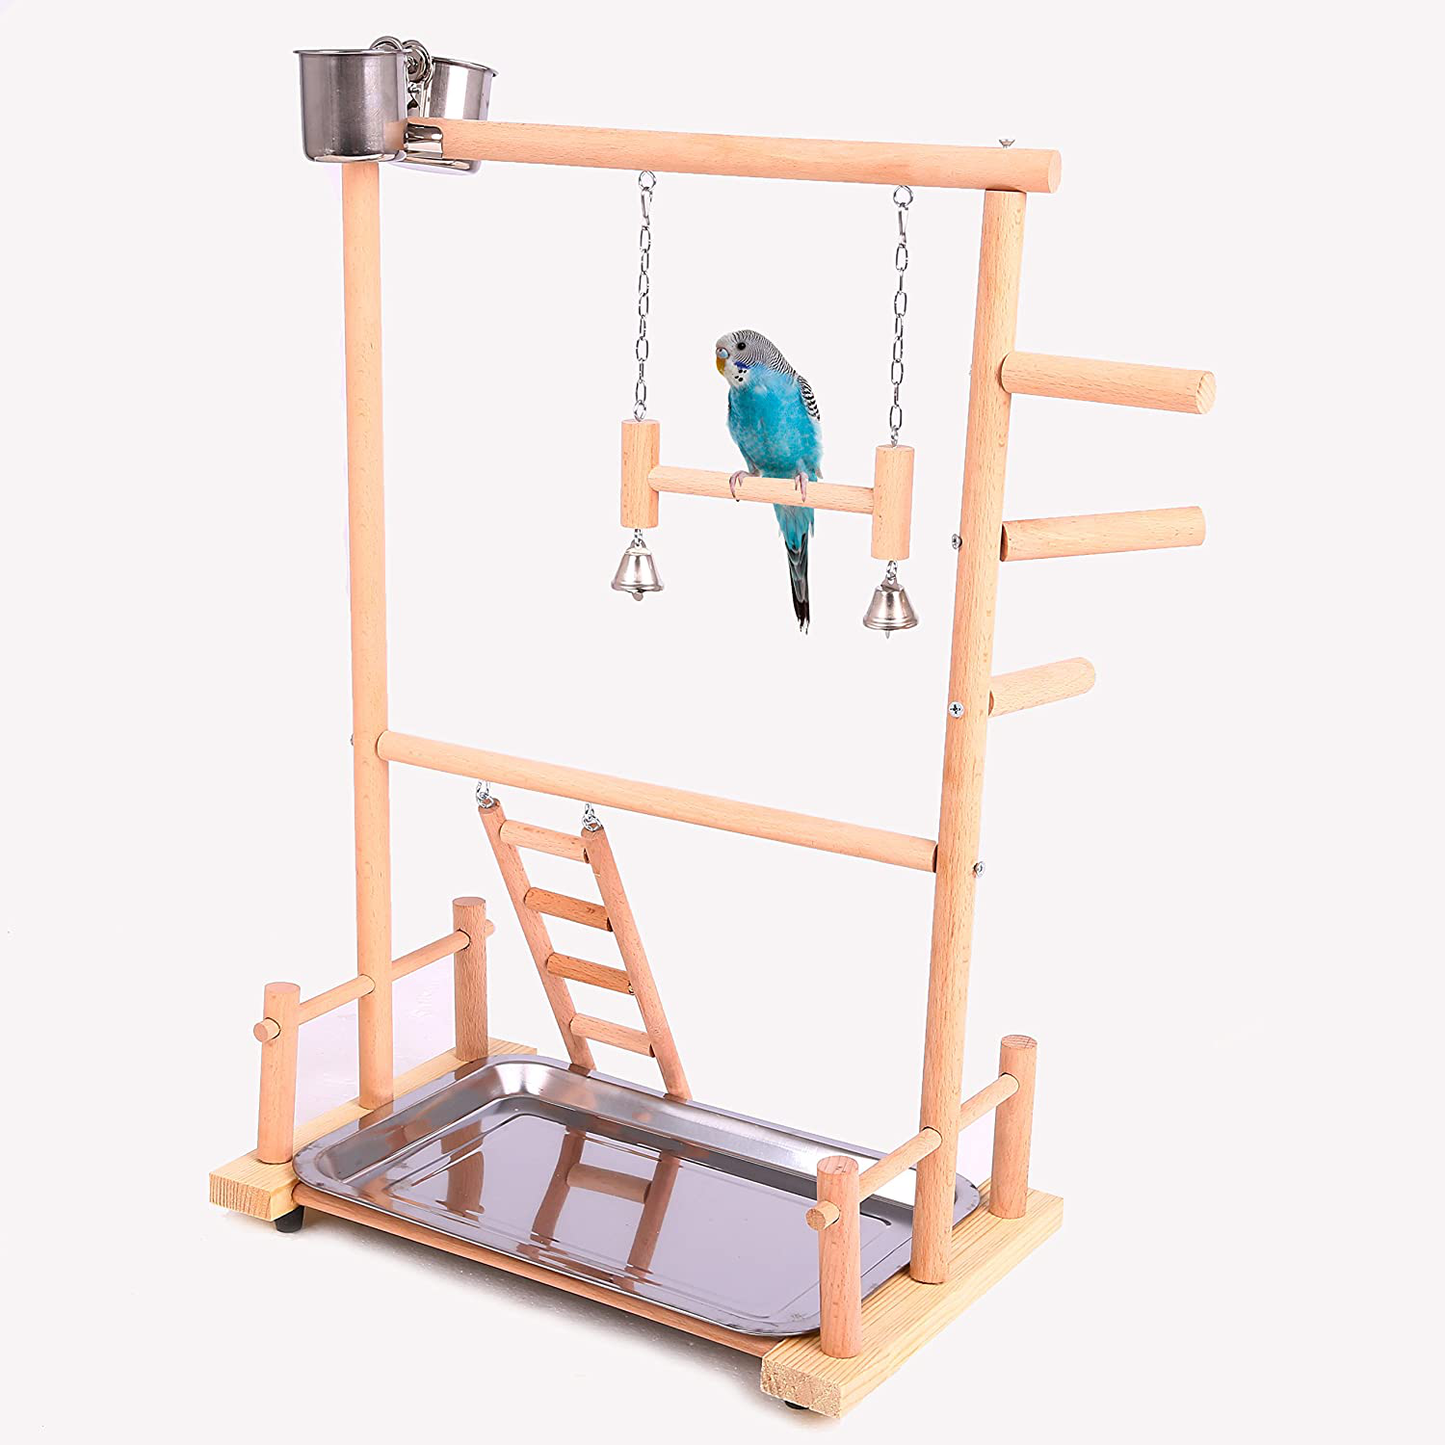 QBLEEV Bird Perches Nest Play Stand Gym Parrot Playground Playgym Playpen Playstand Swing Bridge Wood Climb Ladders Wooden Conures Parakeet Macaw African Animals & Pet Supplies > Pet Supplies > Bird Supplies > Bird Gyms & Playstands QBLEEV 14.17”x9”x20.8”  